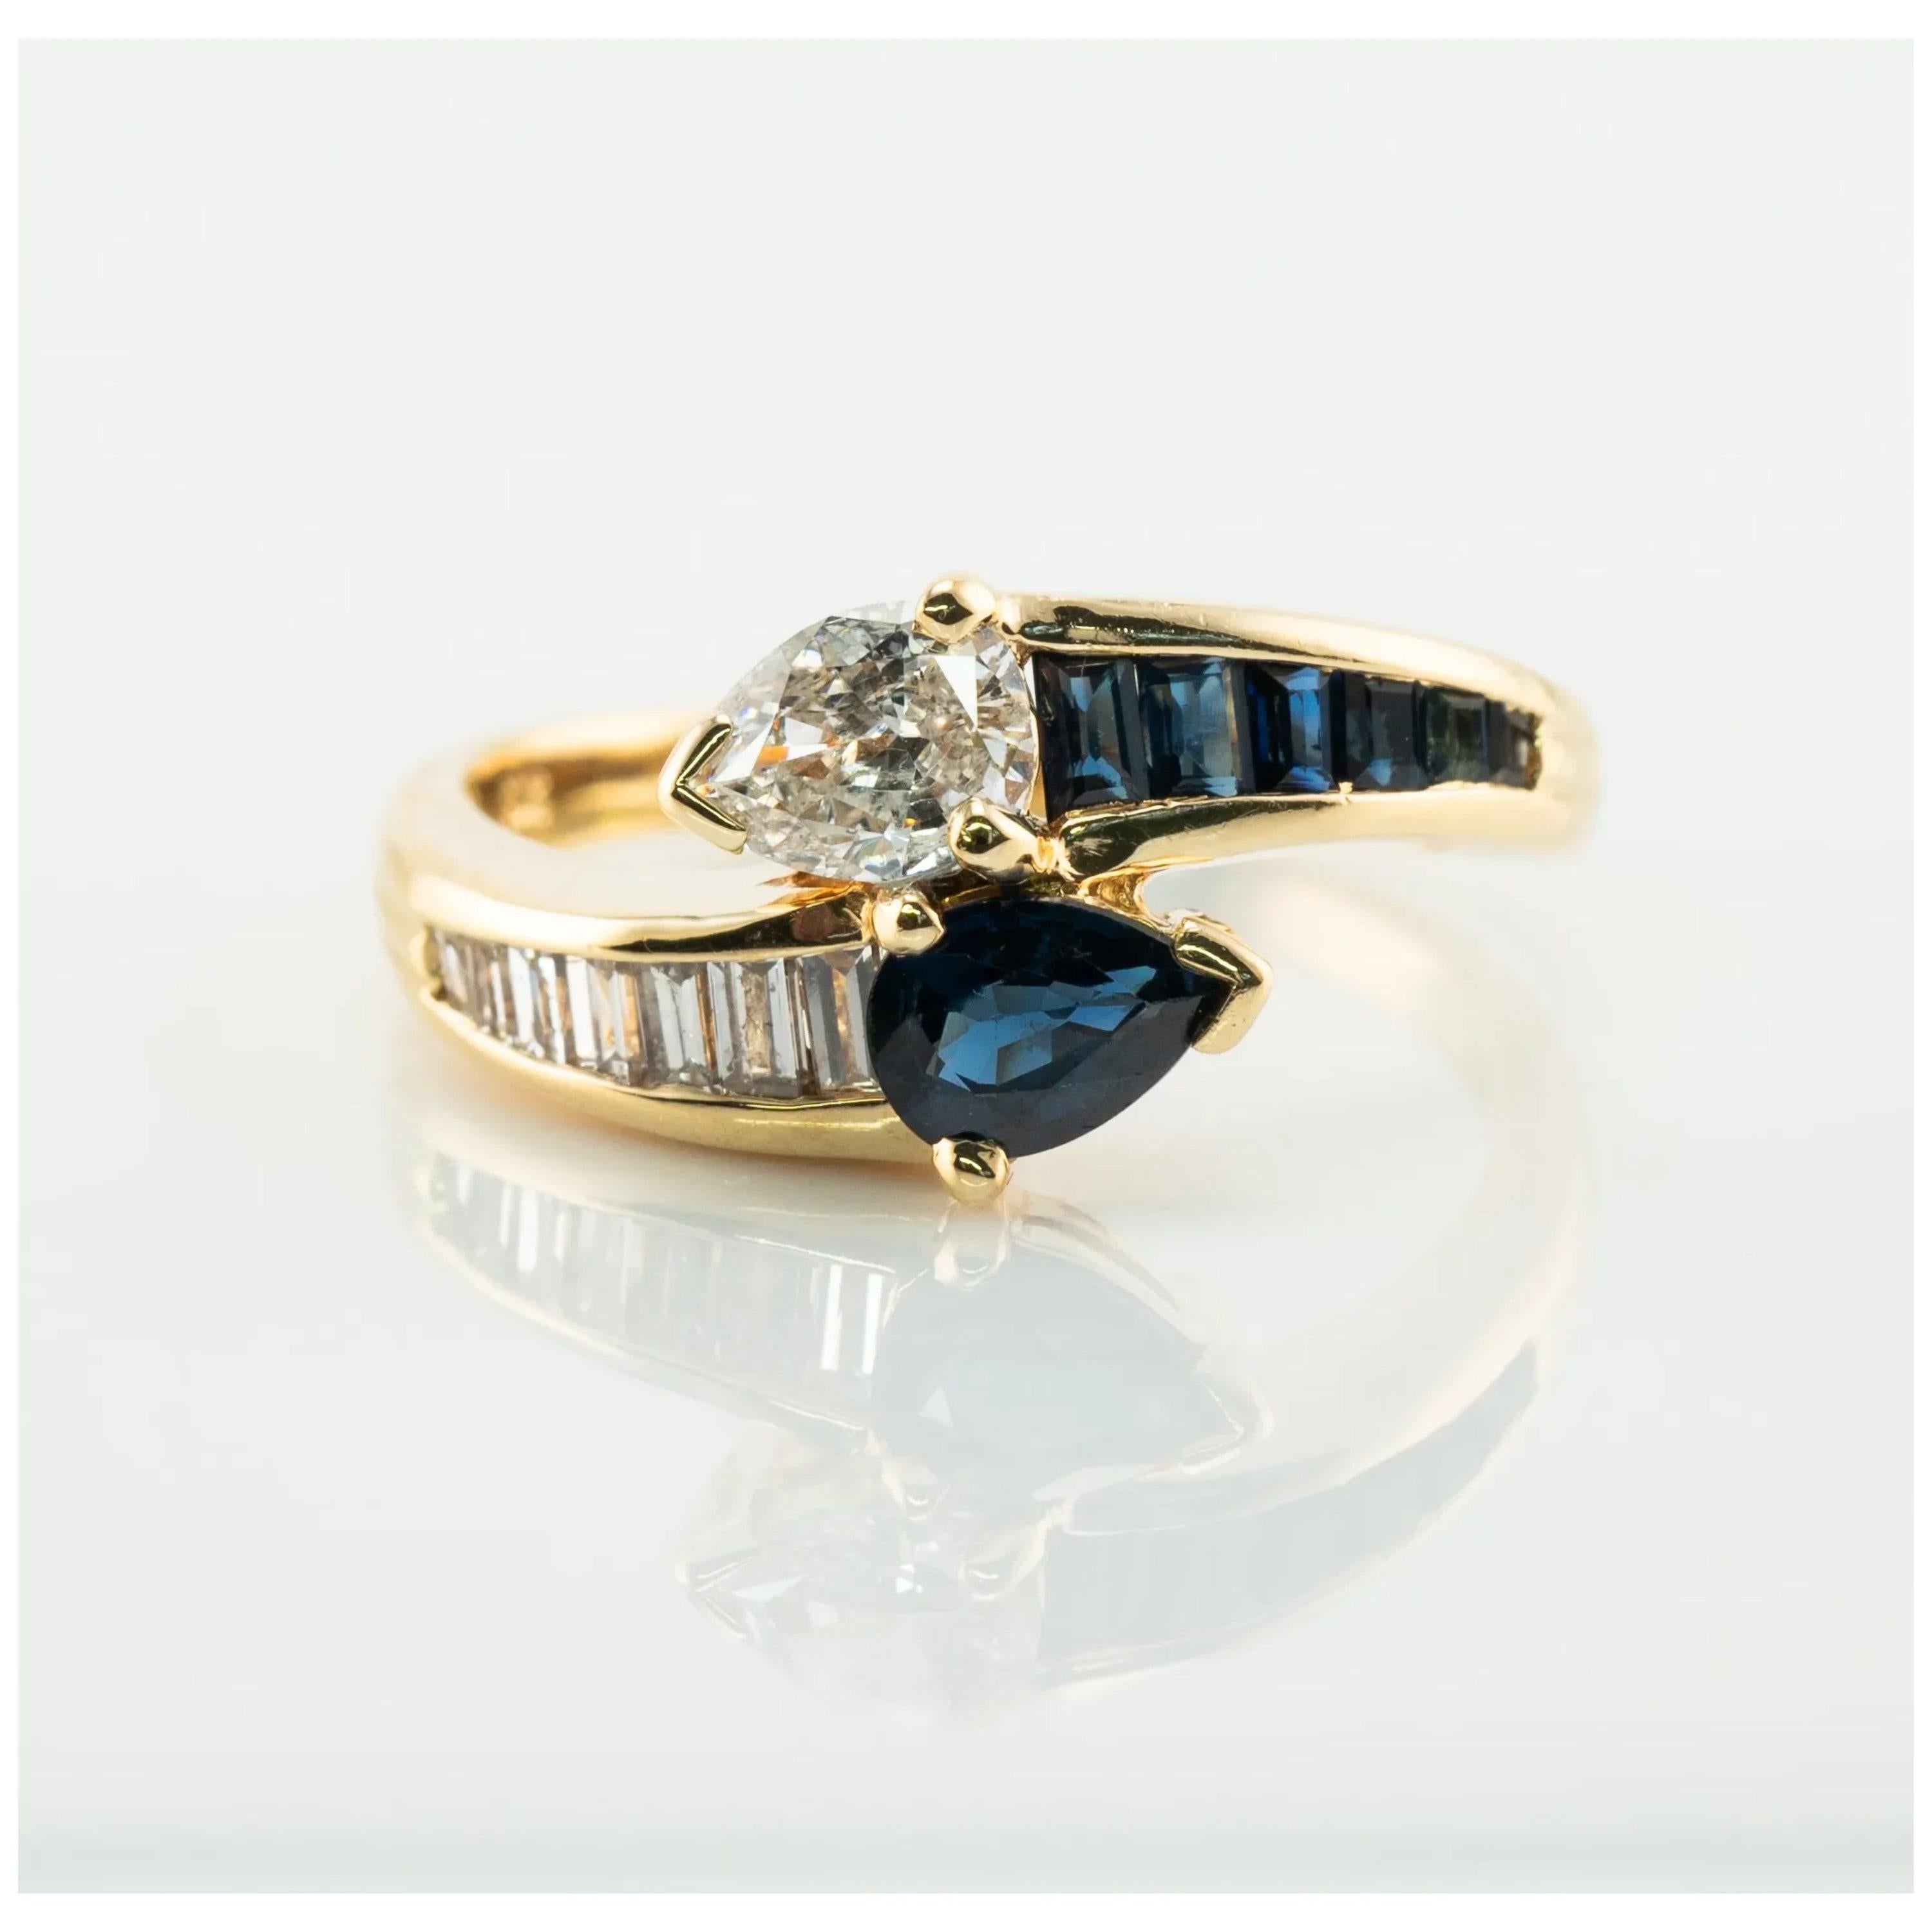 For Sale:  1.21 Pear Cut Diamond Sapphire Engagement Ring, Art Deco Snake Sapphire Ring 5